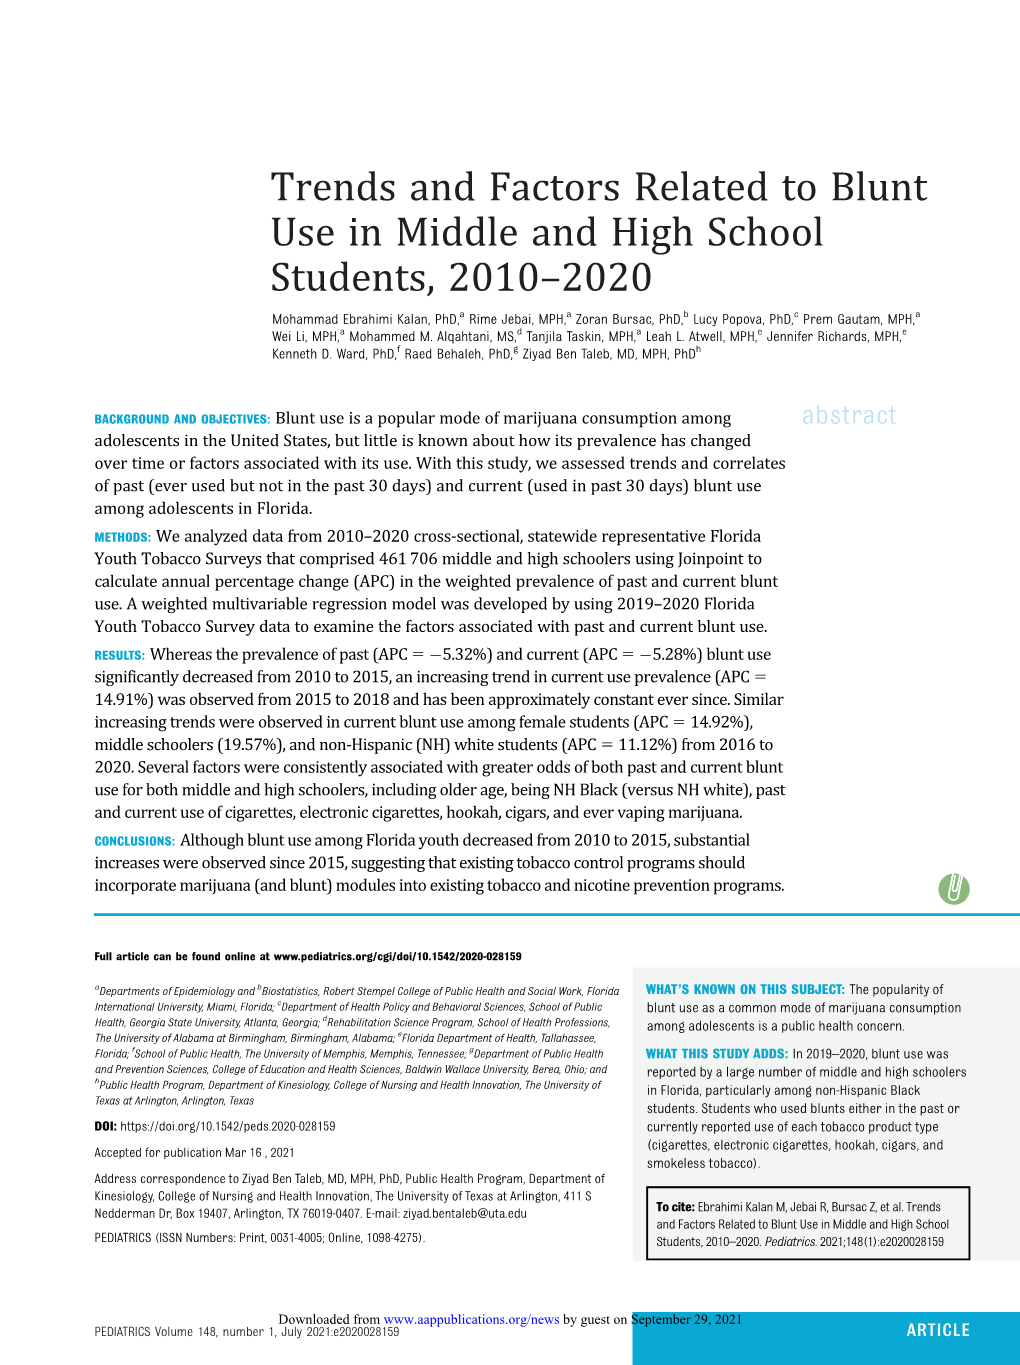 Trends and Factors Related to Blunt Use in Middle and High School